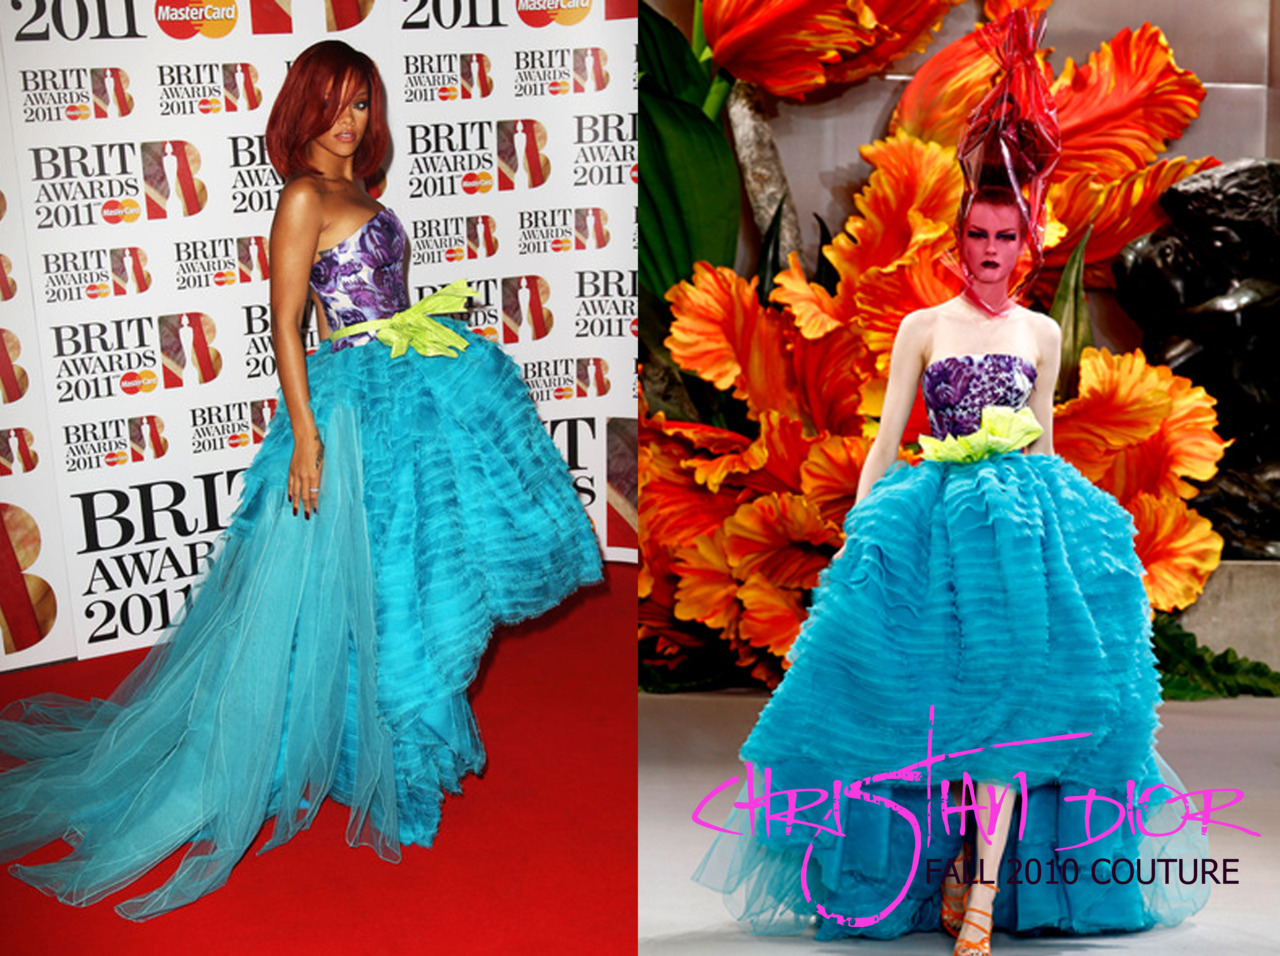 I knew exactly who she was wearing, looking colourful in a detailed textured dress by Christian Dior at the Brits.